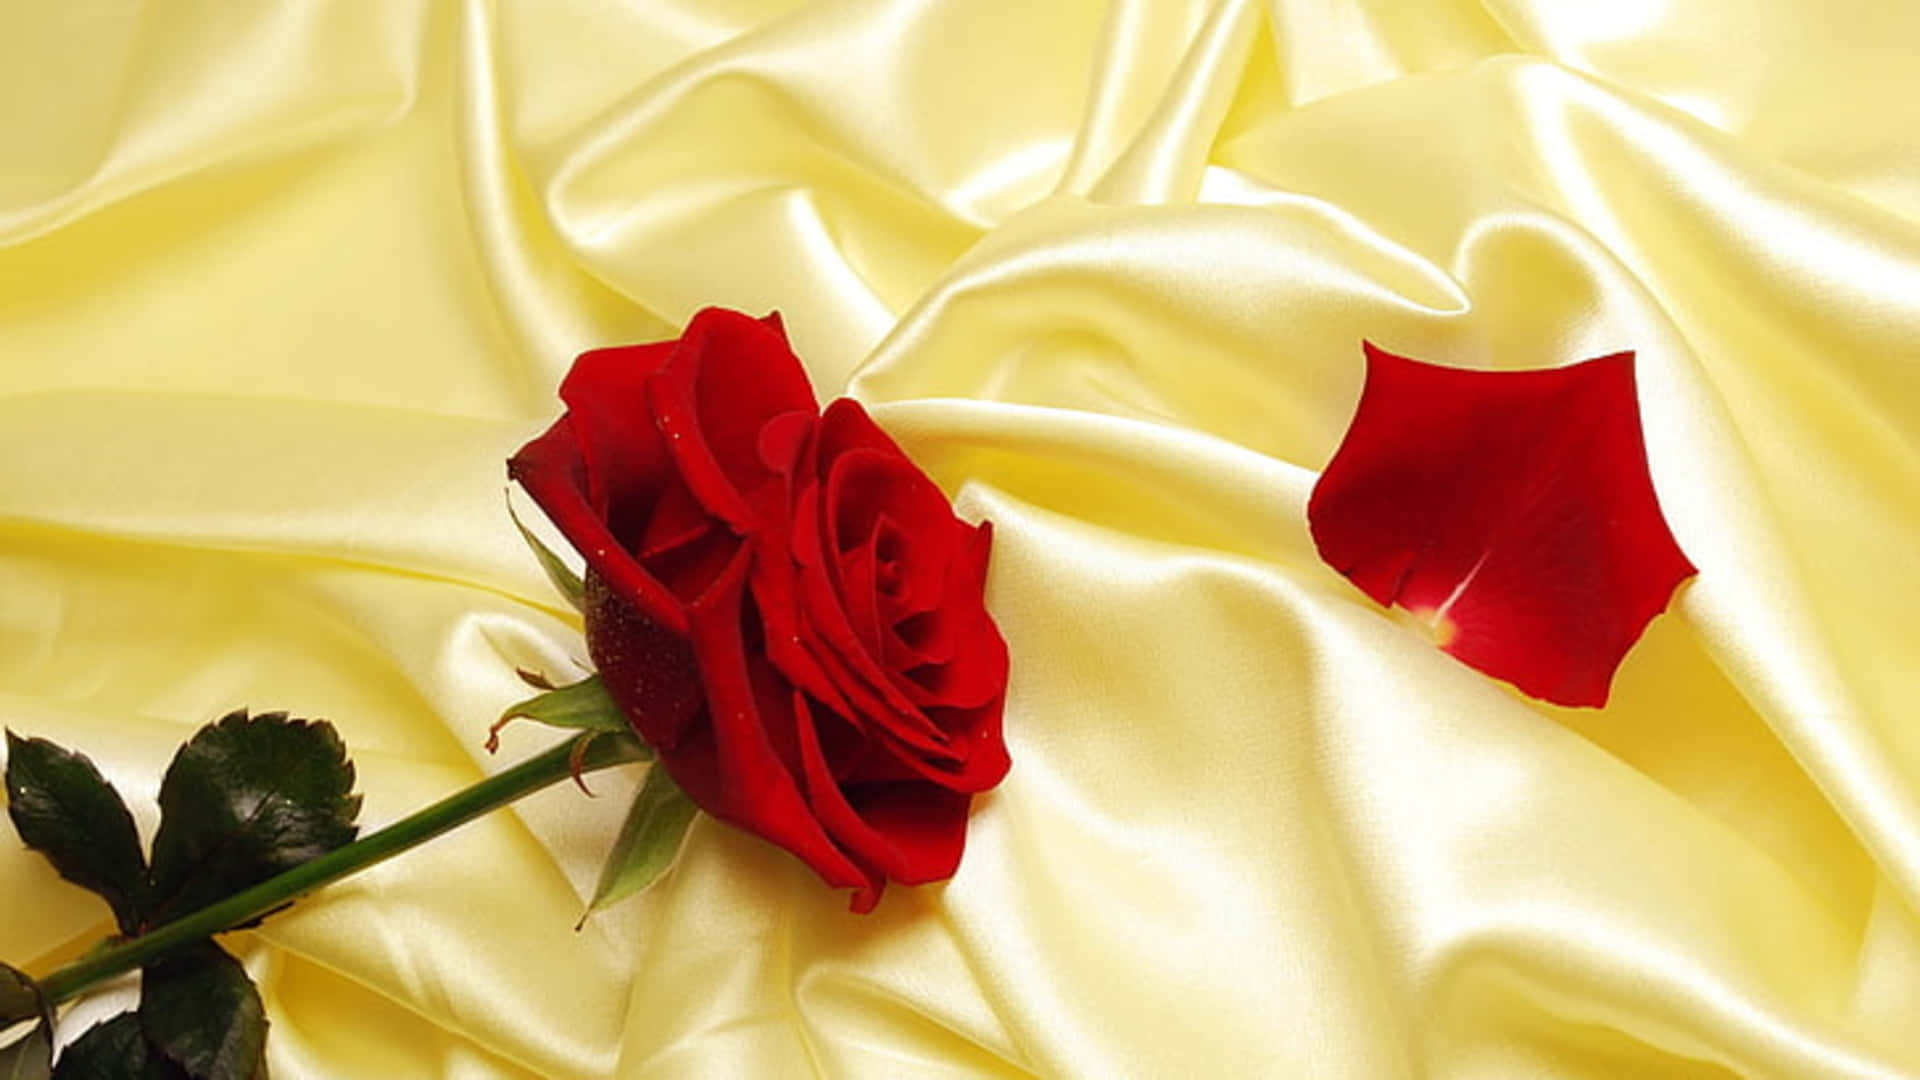 1080p Red Rose Stem And Petal Background